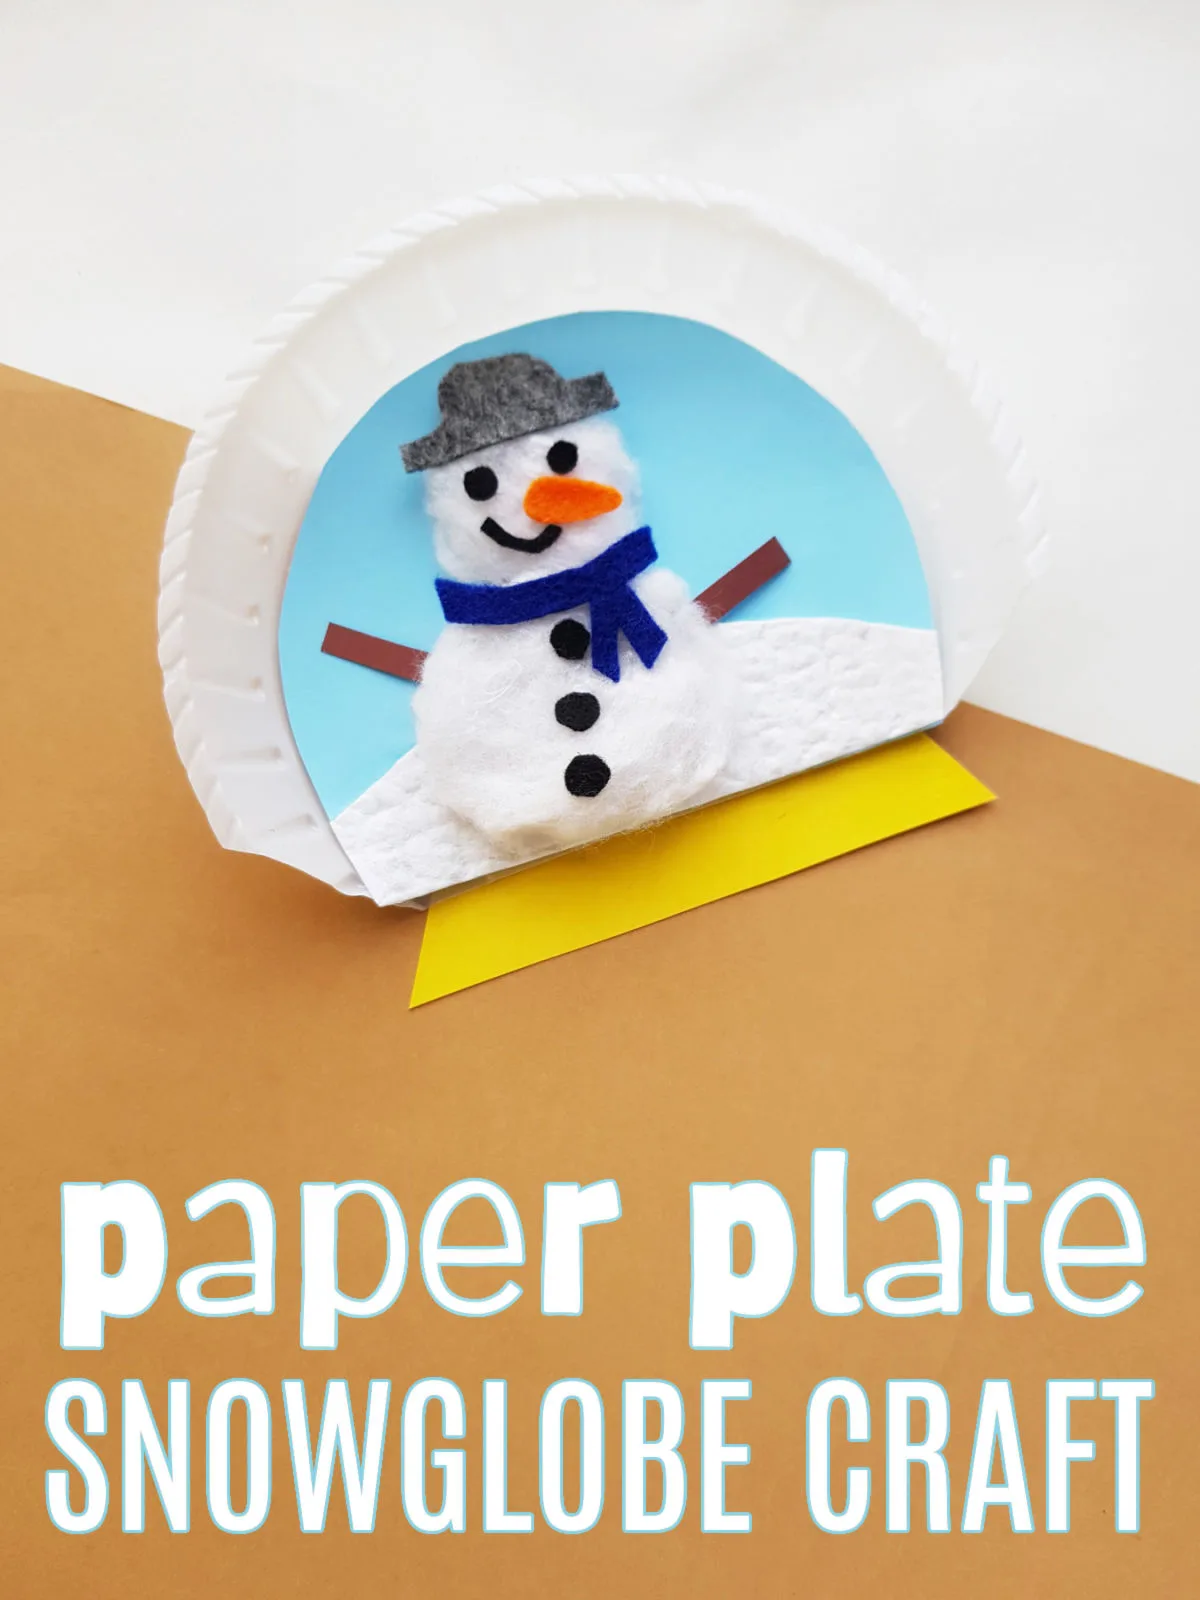 Paper Plate Snow Globe Craft on a white and brown background.